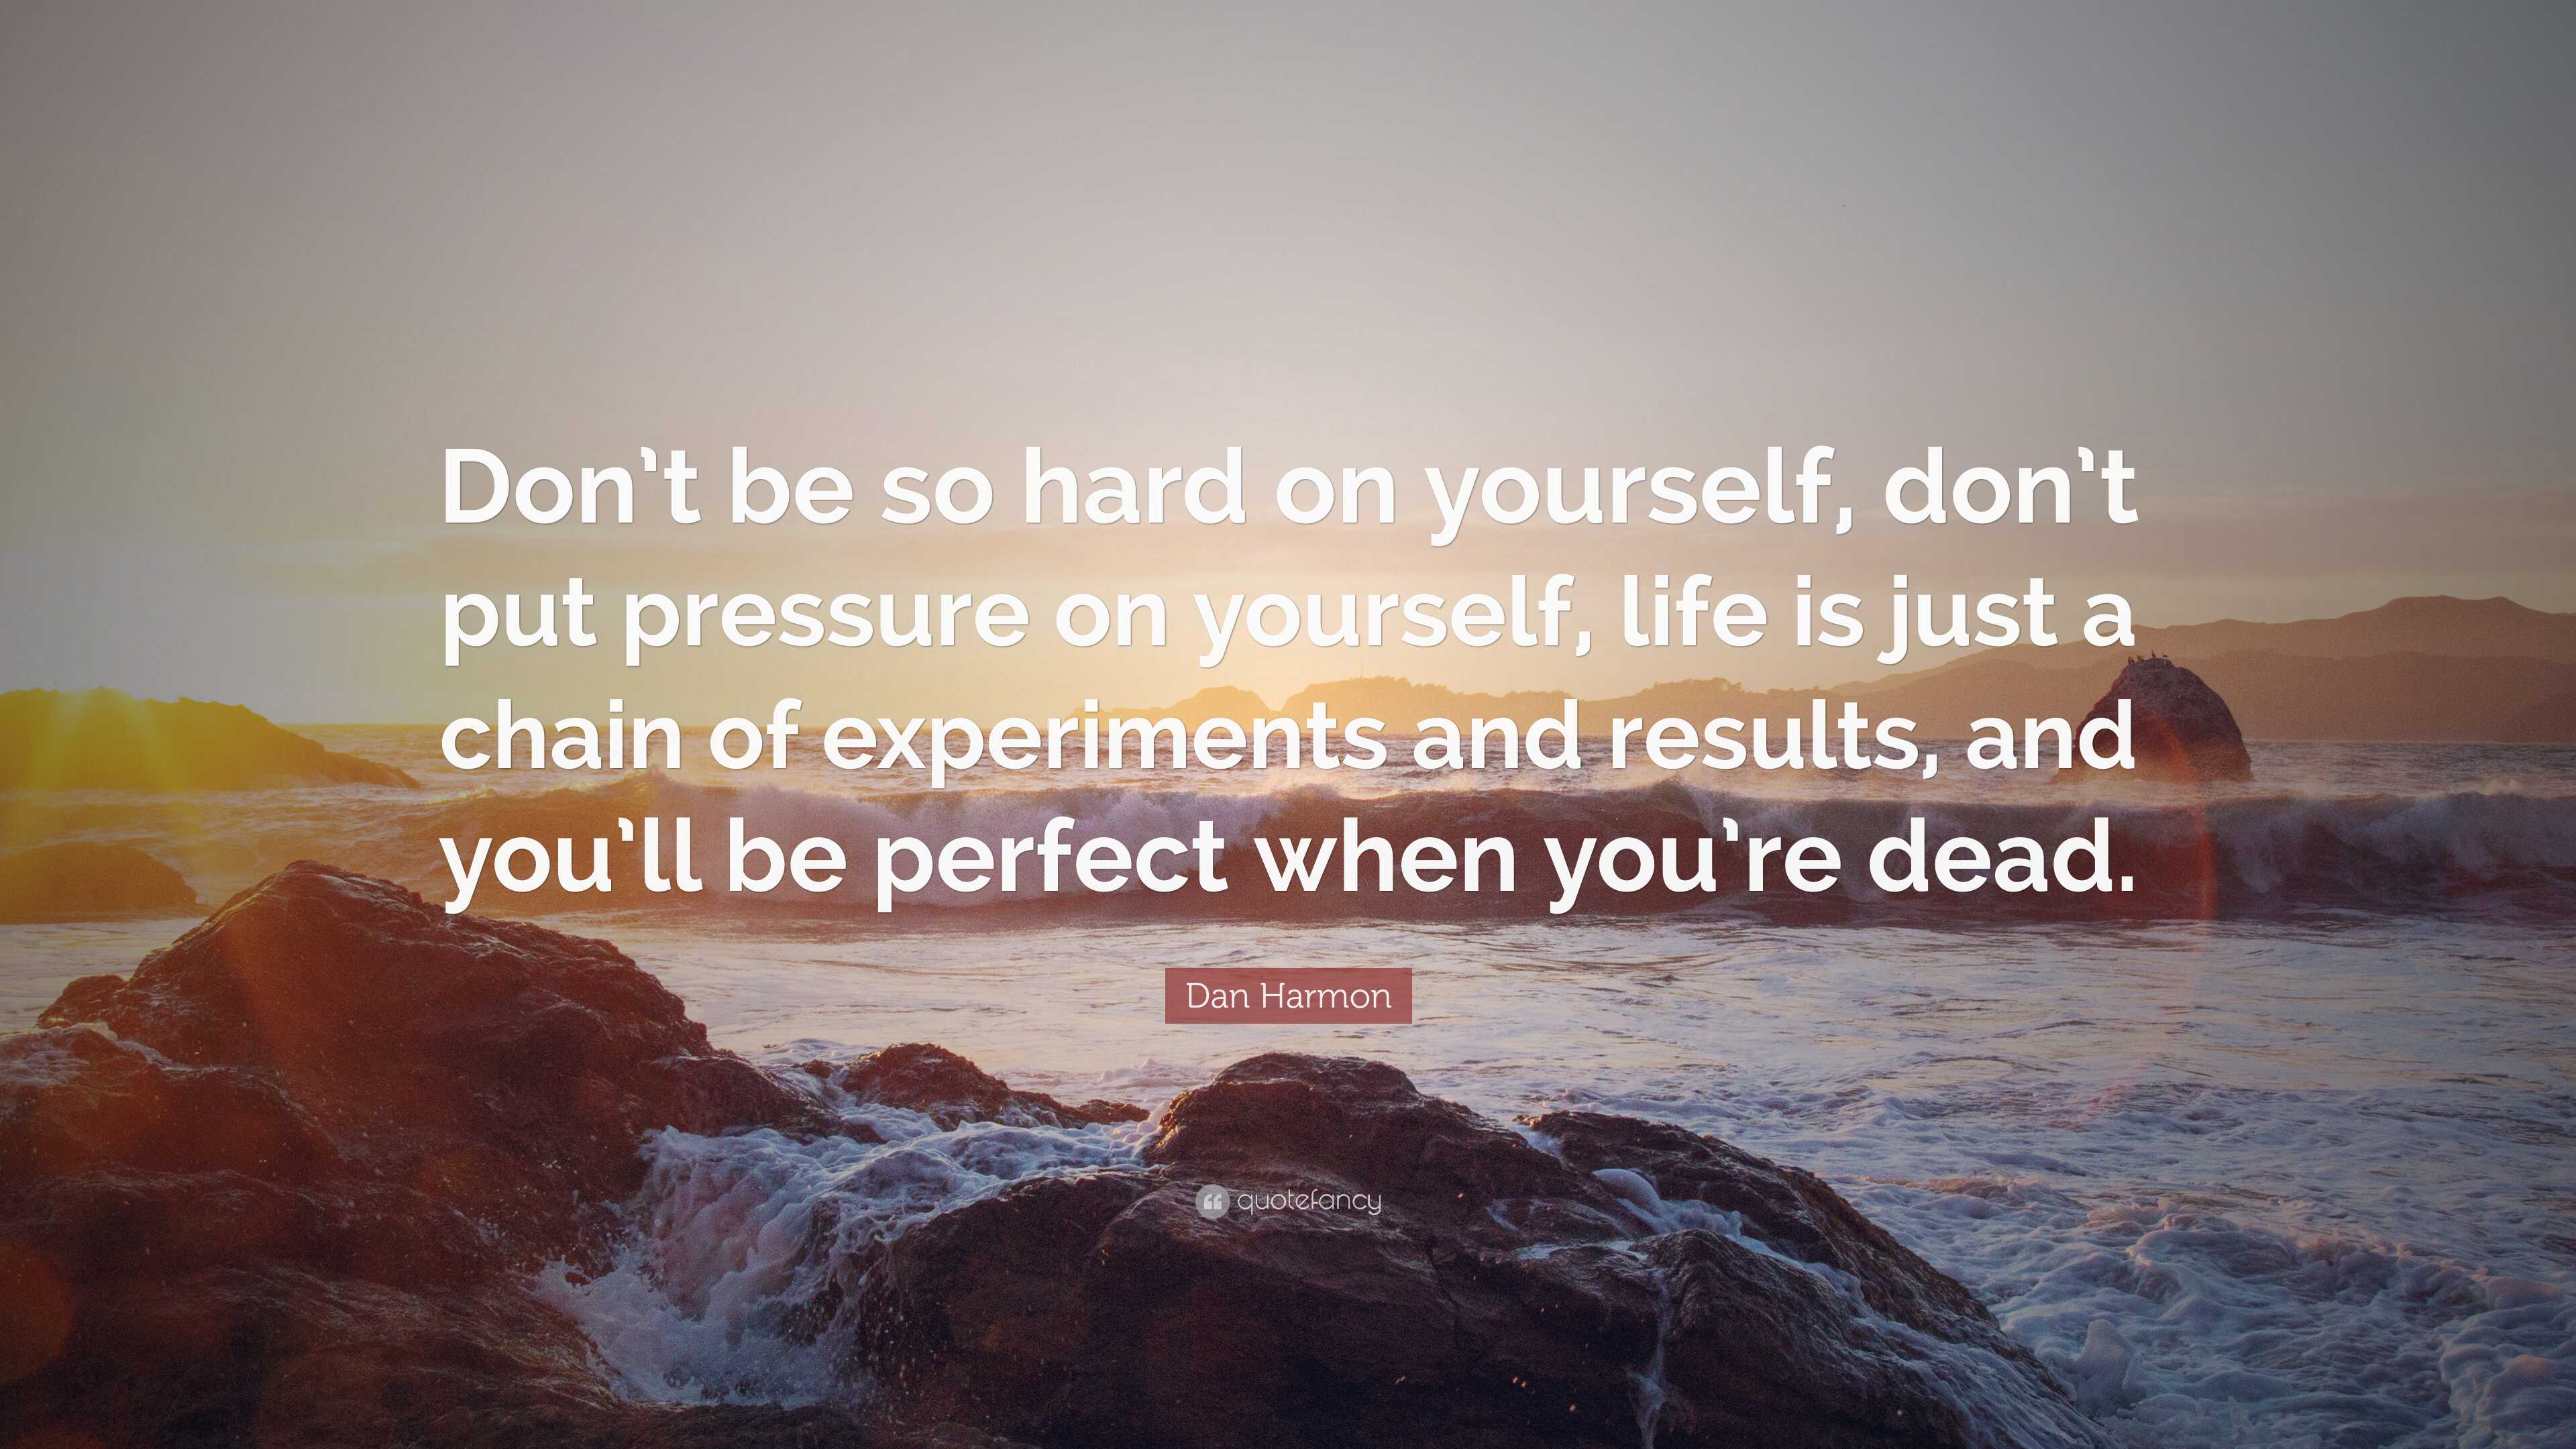 Dan Harmon Quote: “Don't be so hard on yourself, don't put pressure on  yourself, life is just a chain of experiments and results, and you'l”